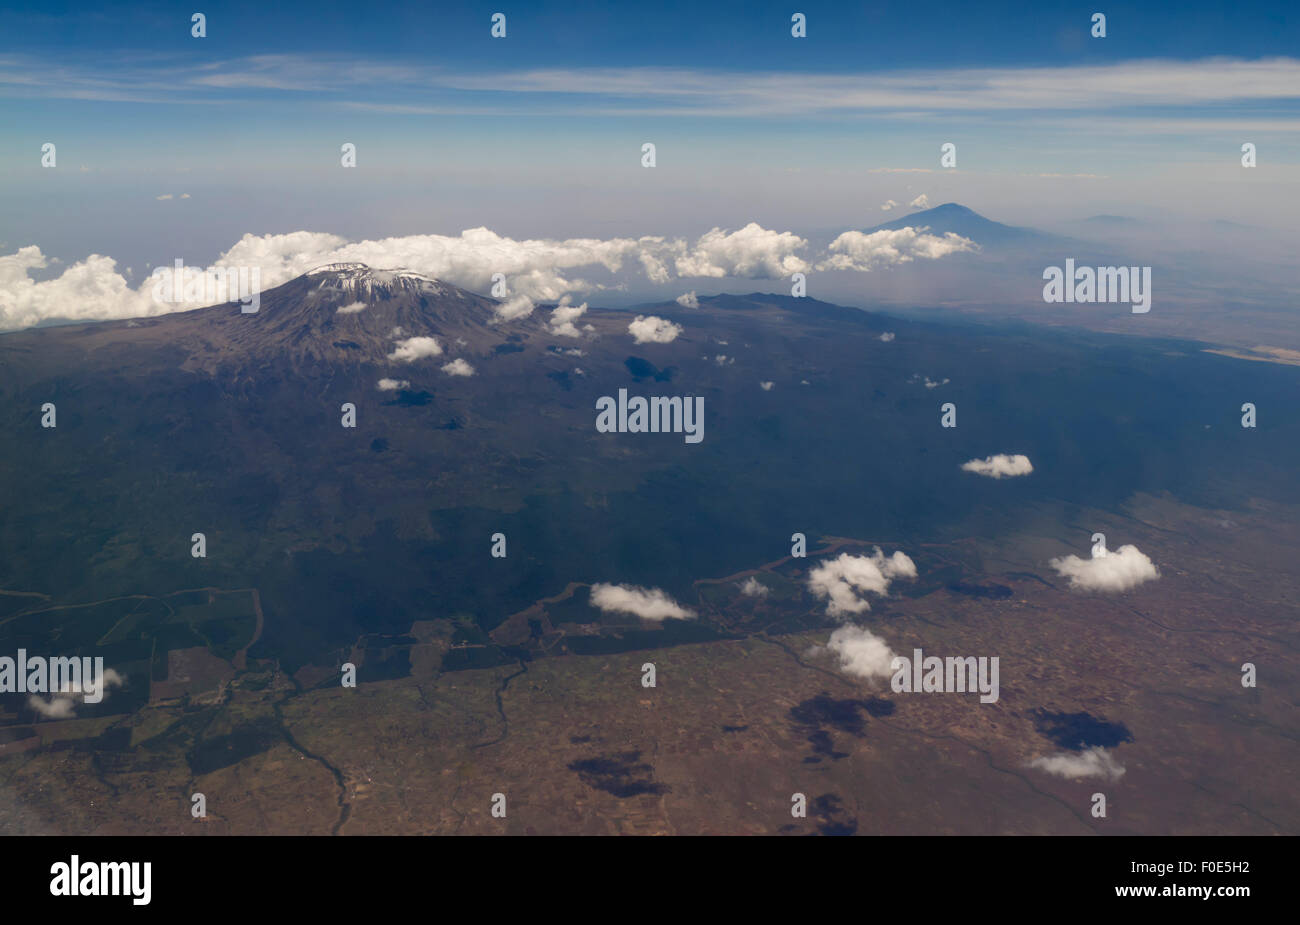 East Africa, Kilimanjaro, aerial view Stock Photo